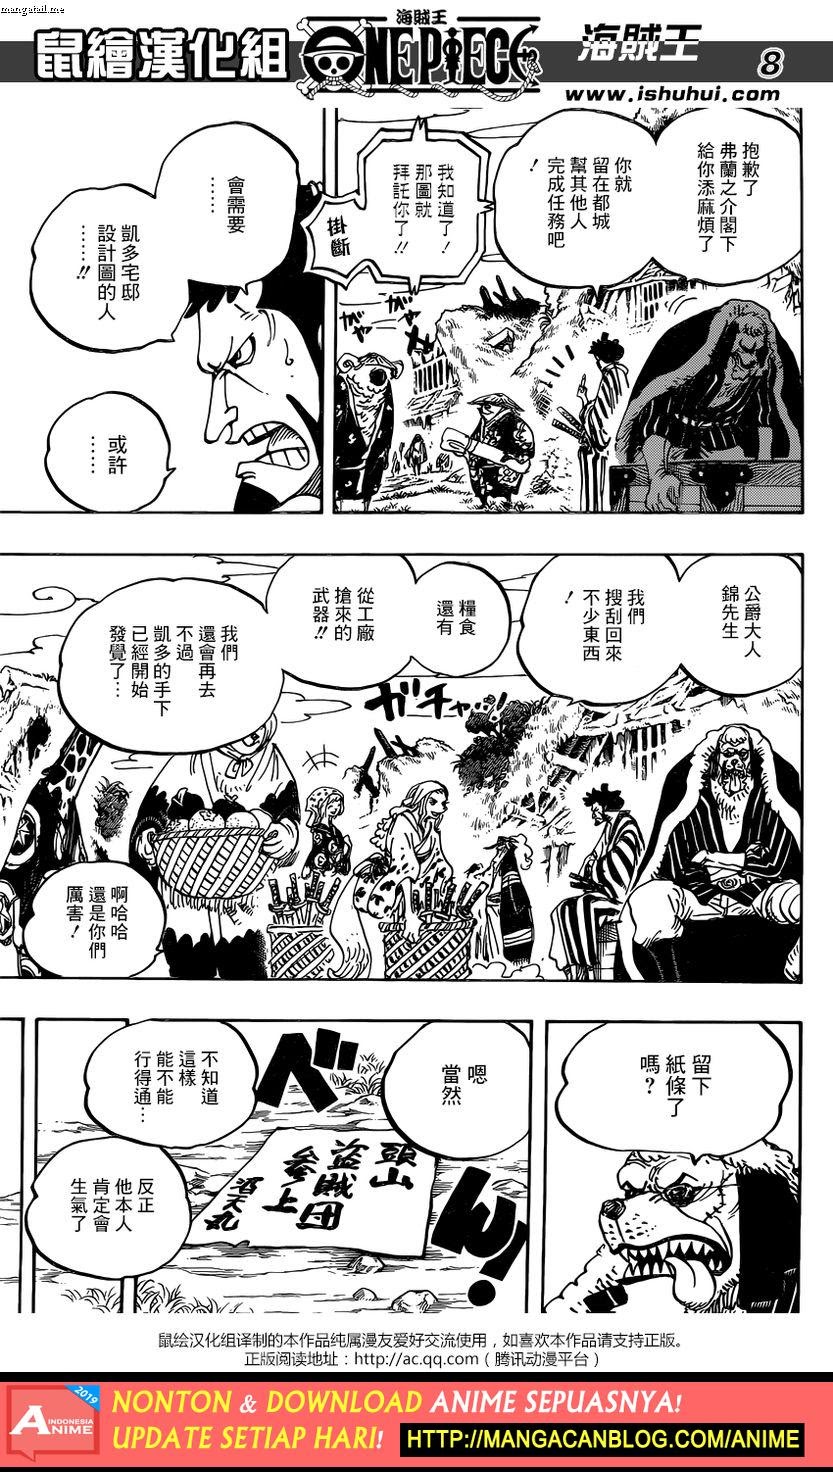 One Piece Chapter 928 – Raw - 105